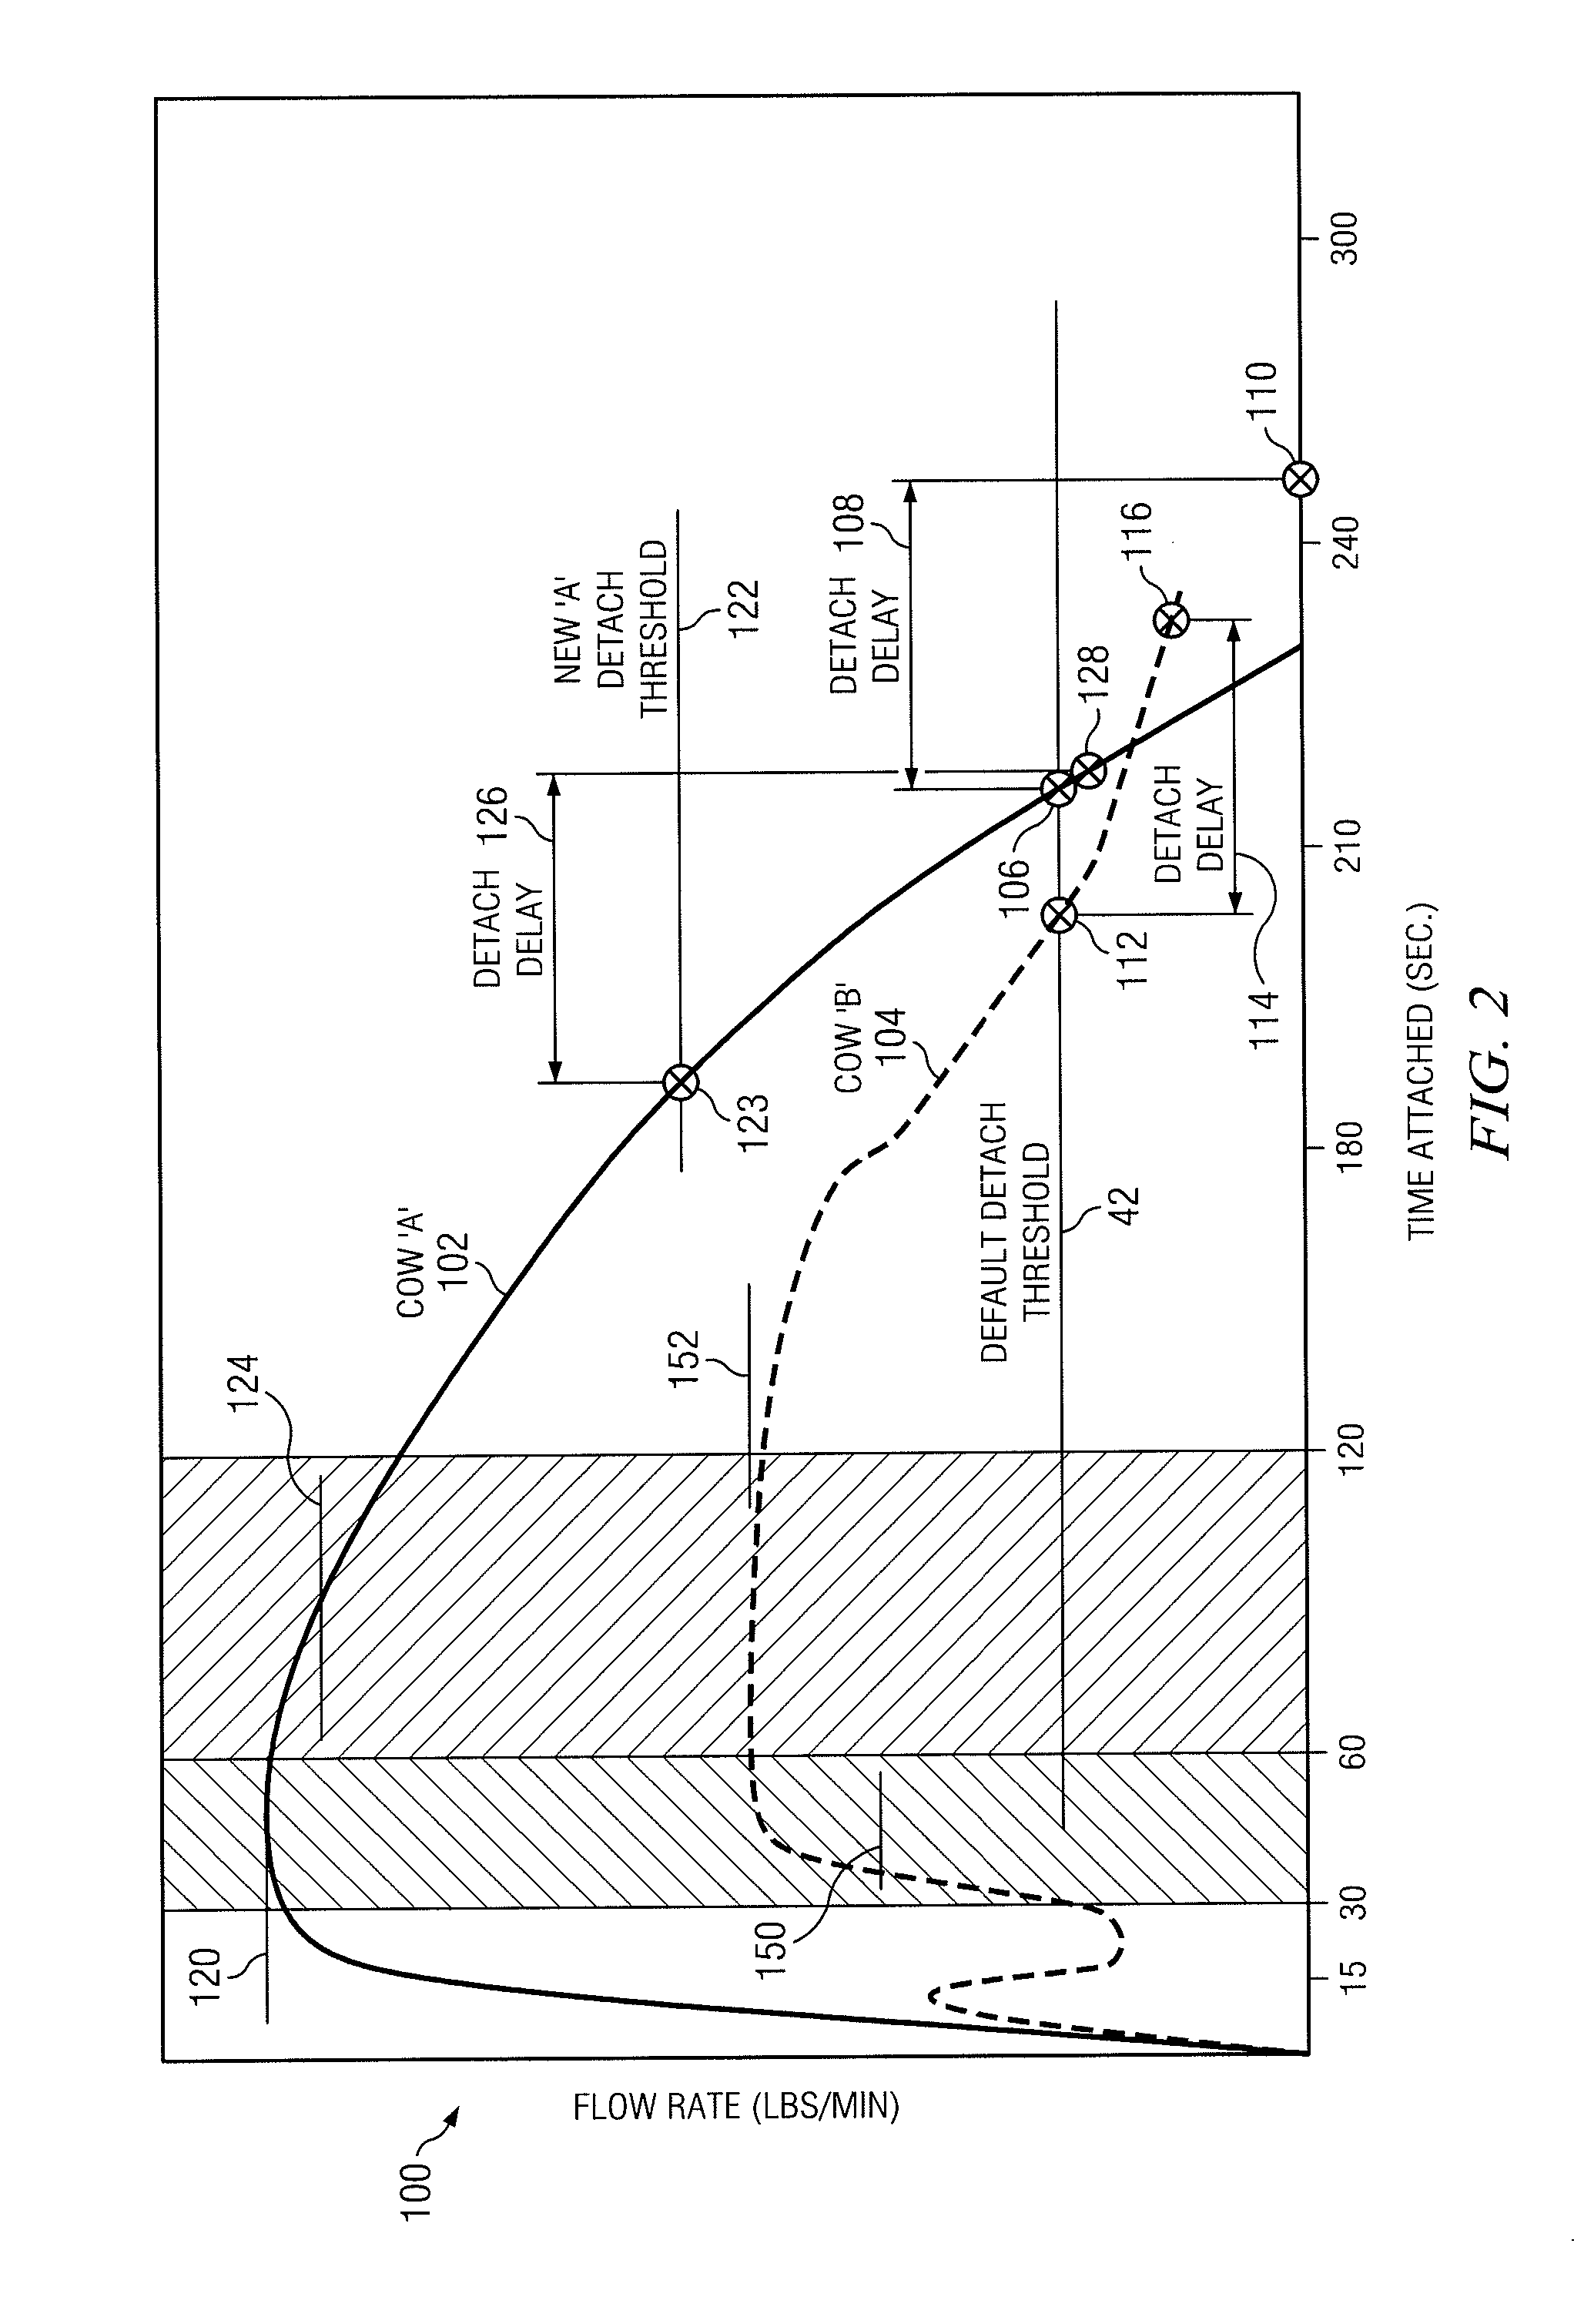 System and method for implementing an adaptive milking process